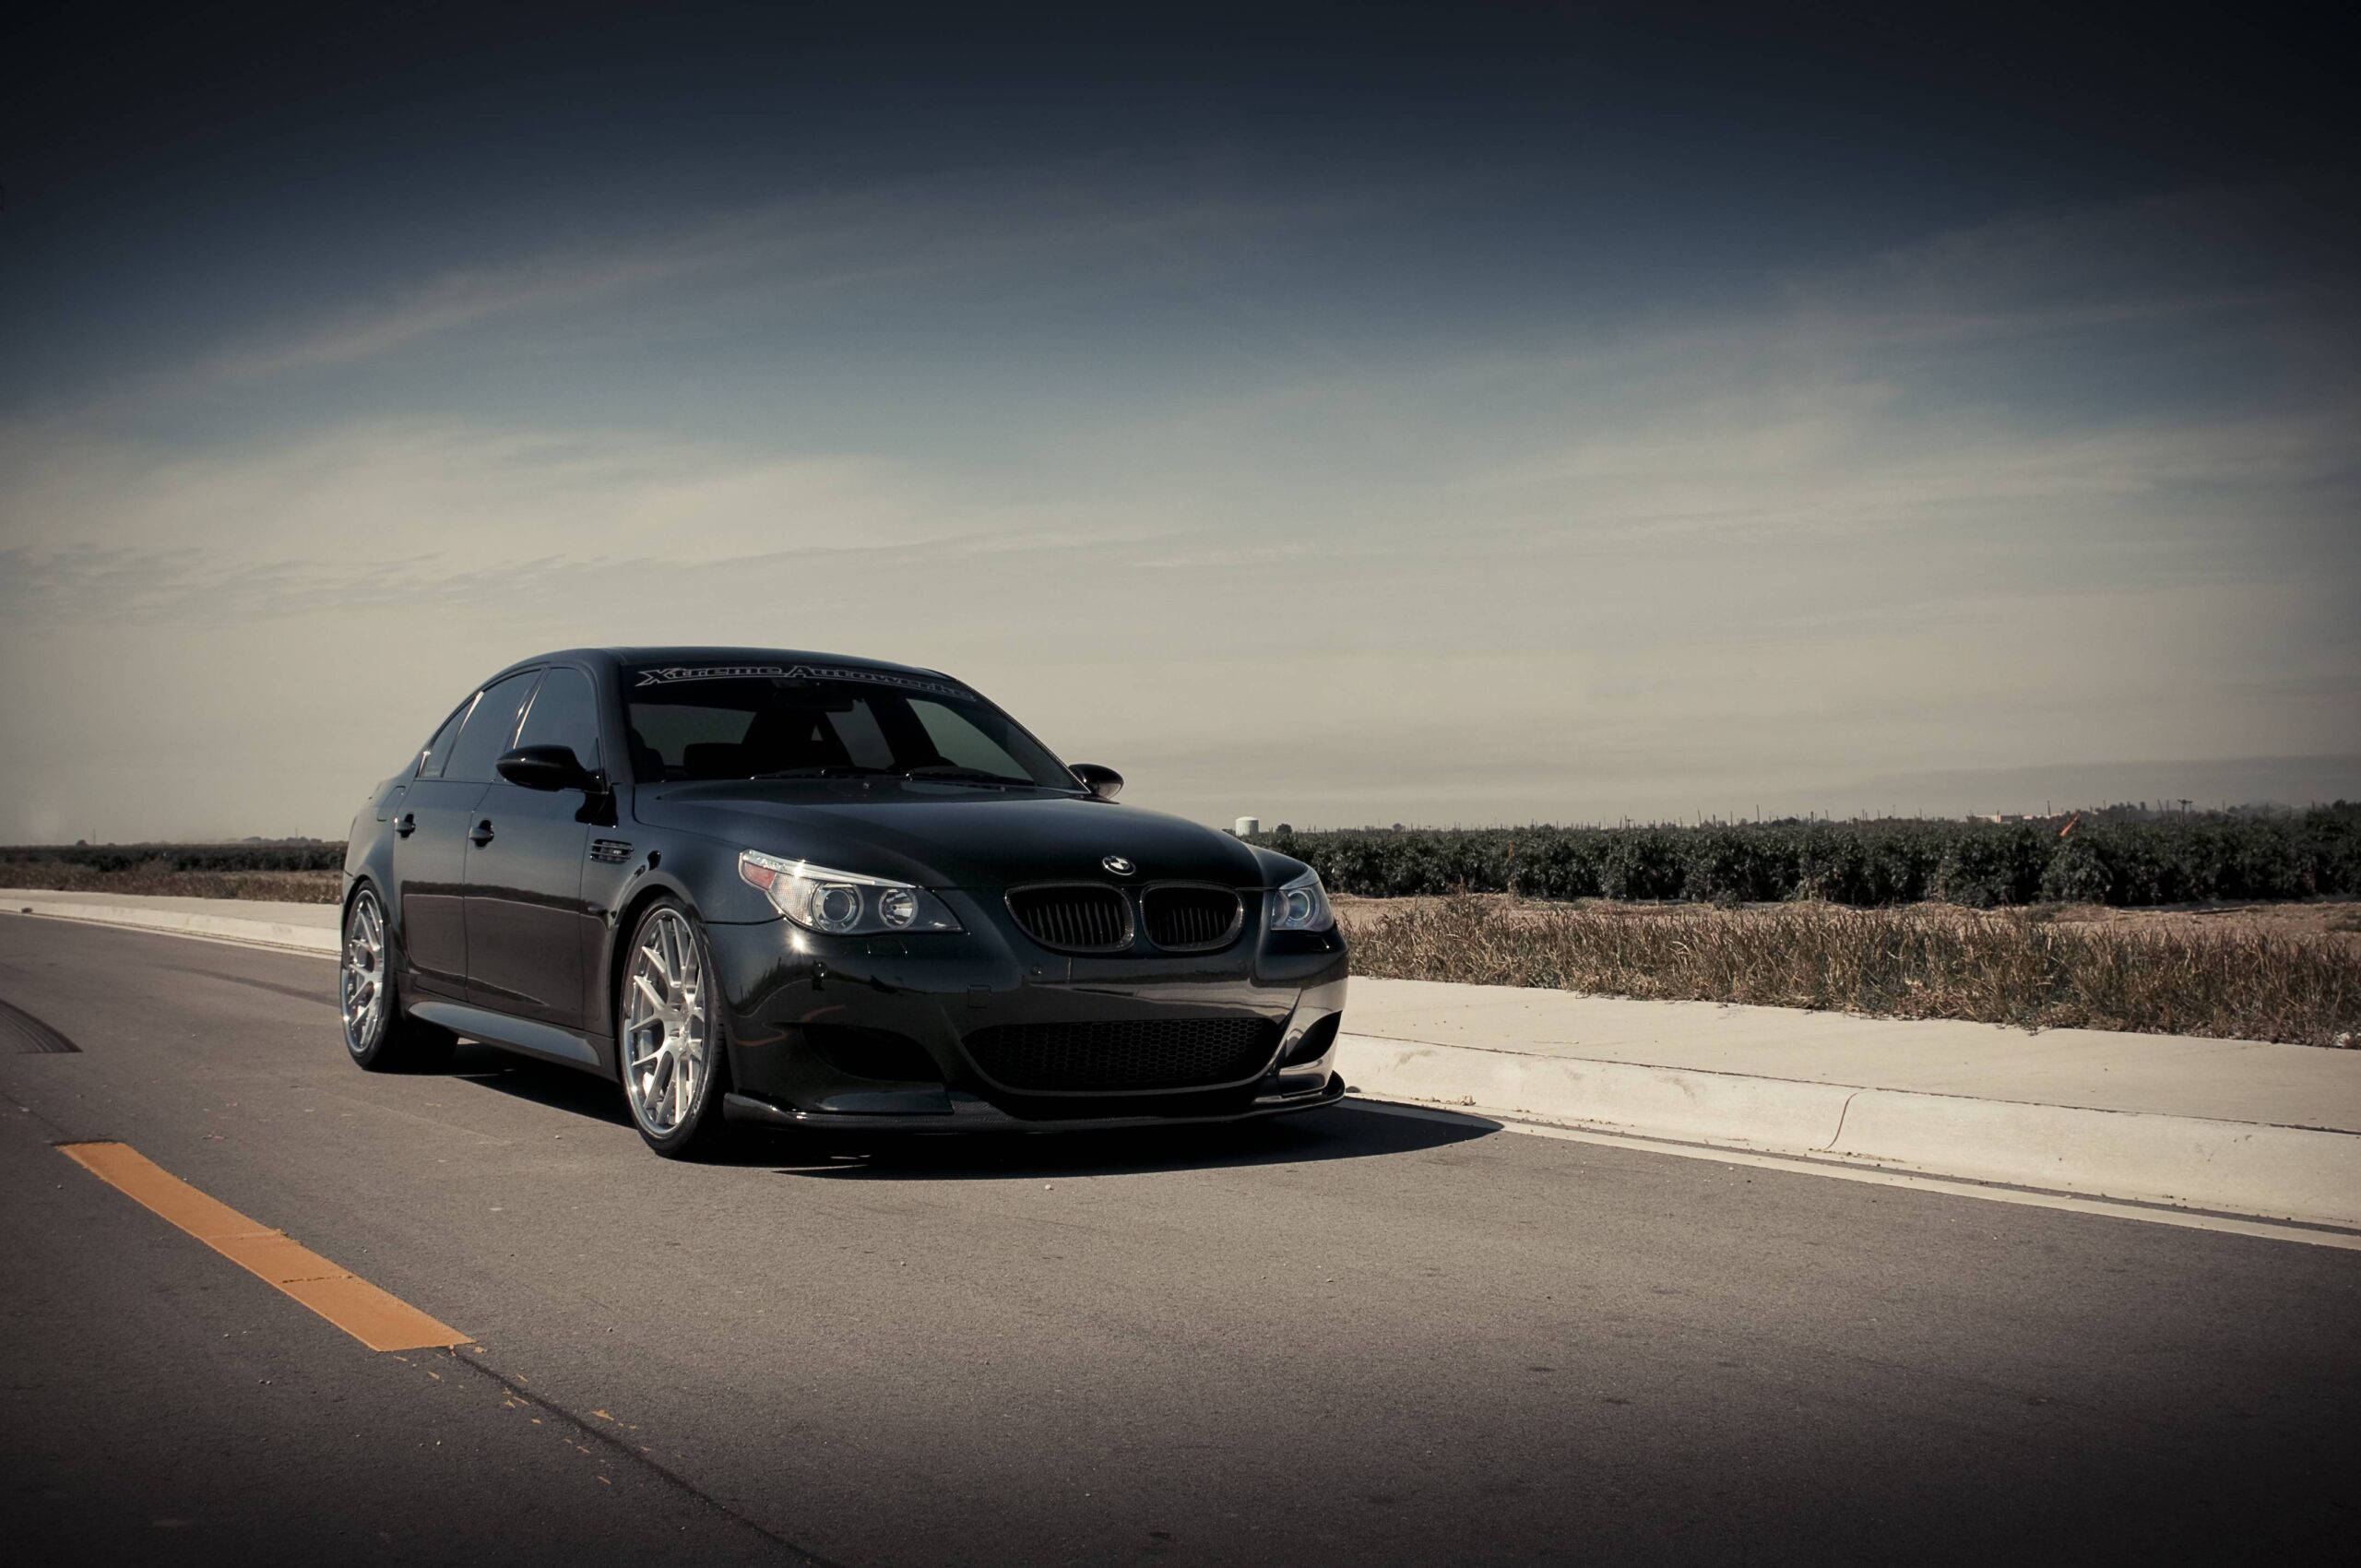 Best Car BMW E60 Wallpapers Wallpapers